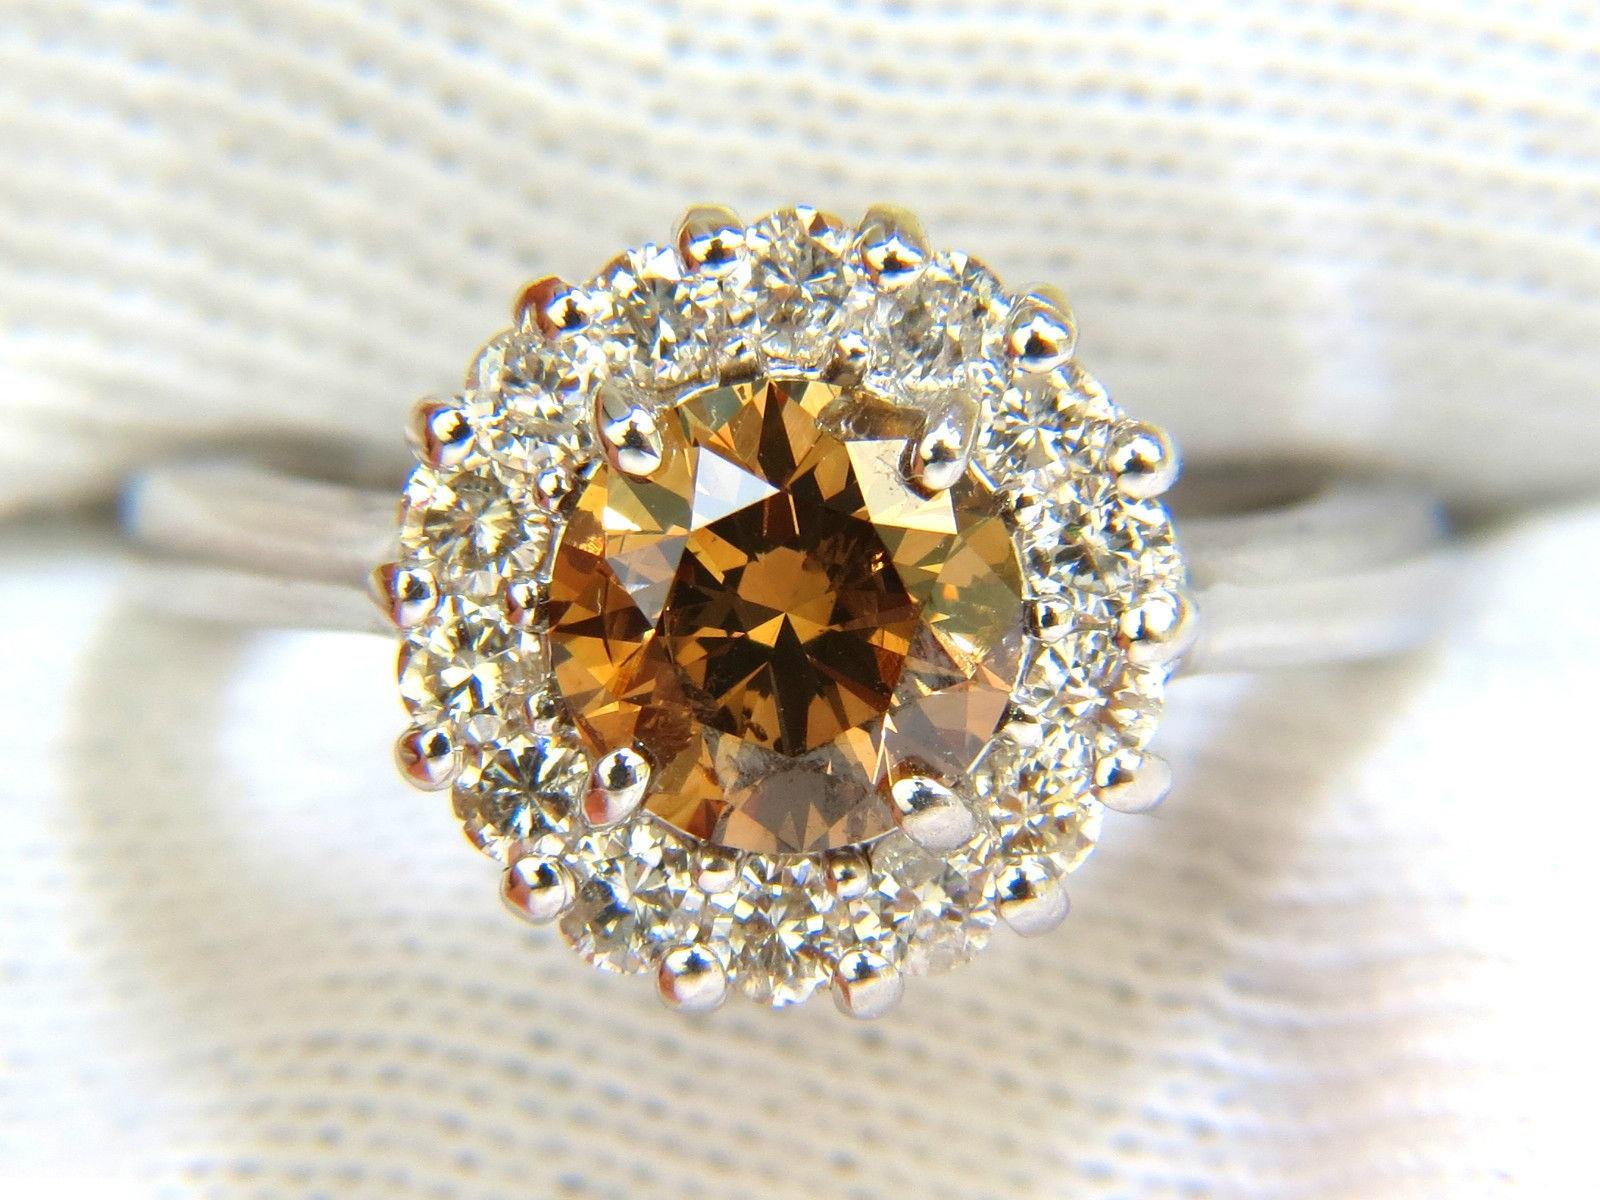 1.35ct. Natural Fancy color Orange Brown diamond

Round, brilliant full cut 

Si-1 clarity

Diamond is 6.9mm wide
Beautiful  sparkles throughout



.66ct. Side diamonds:

Full cuts and rounds 

G-color Vs-2 clarity.

Video of ring upon